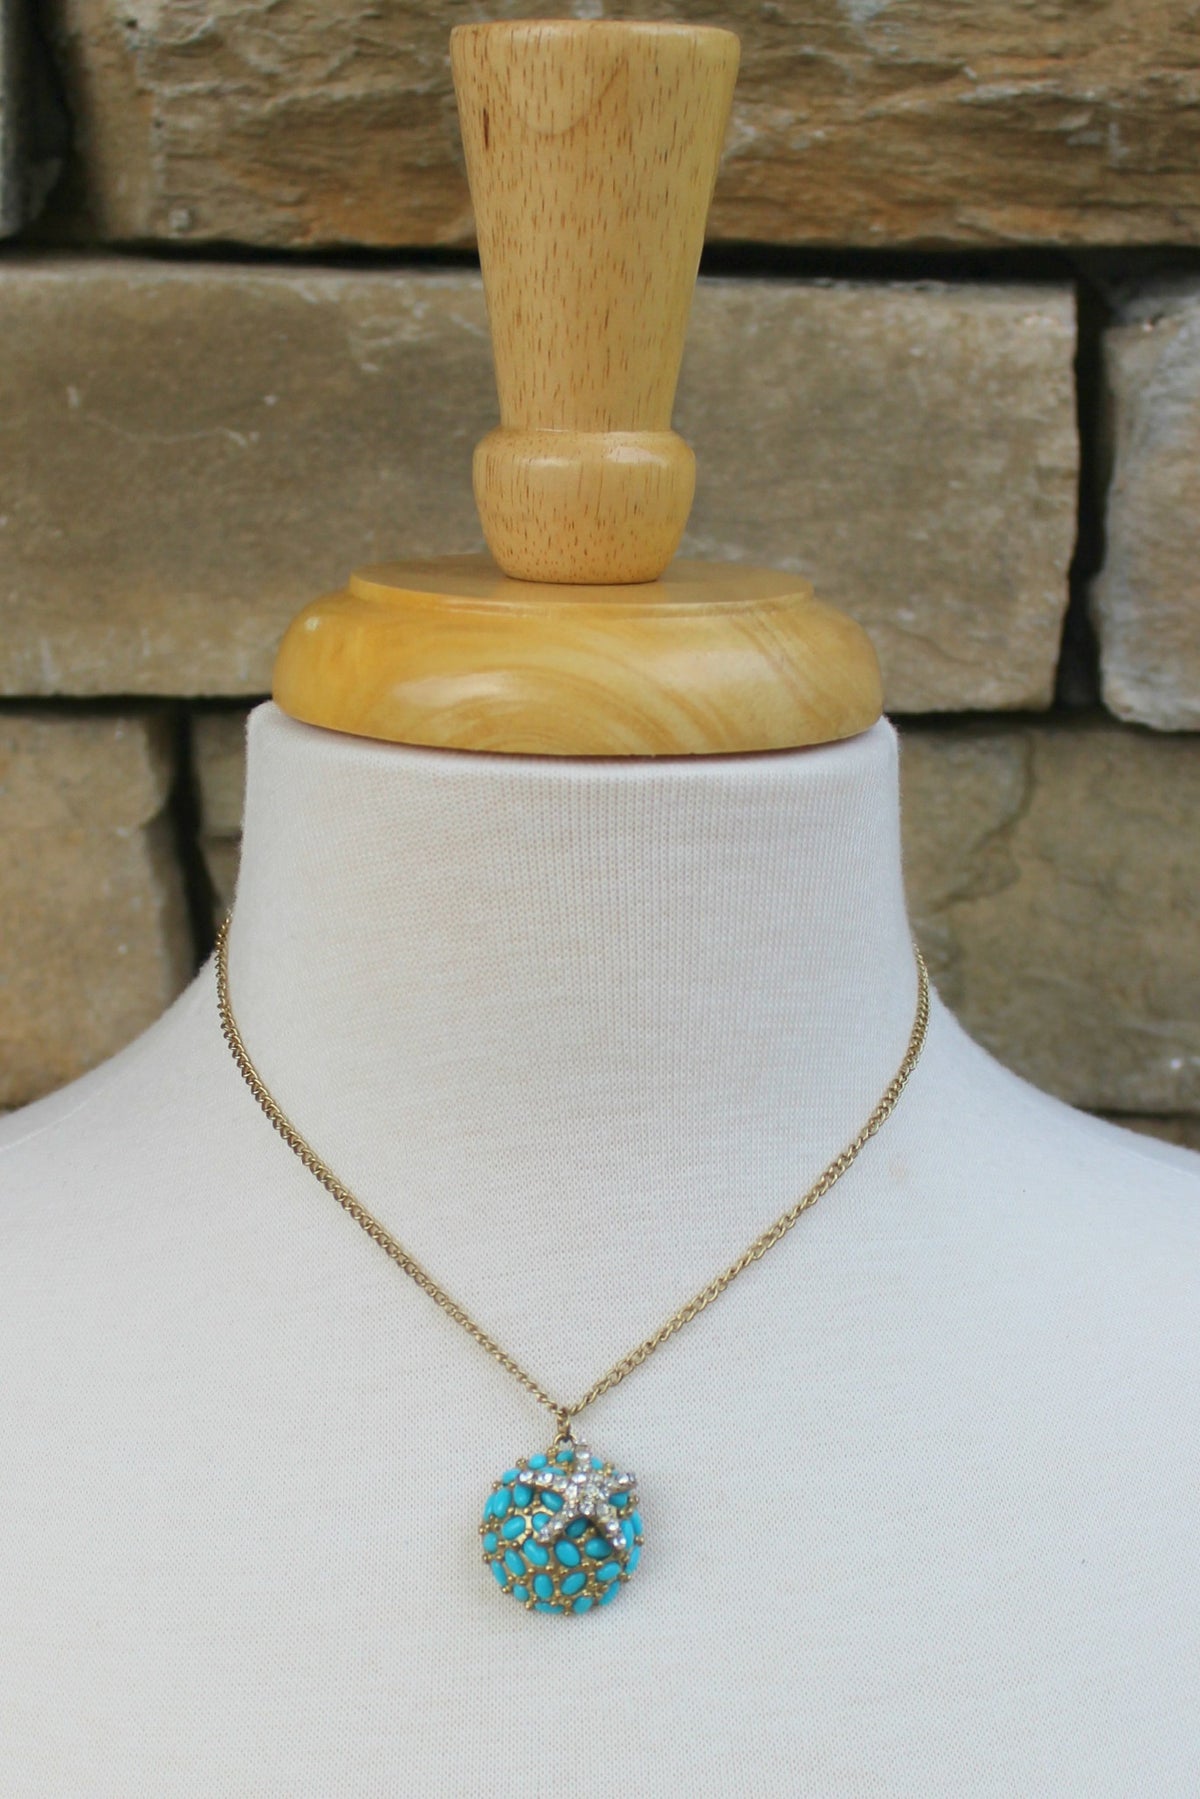 Crystal Starfish Necklace, Turquoise